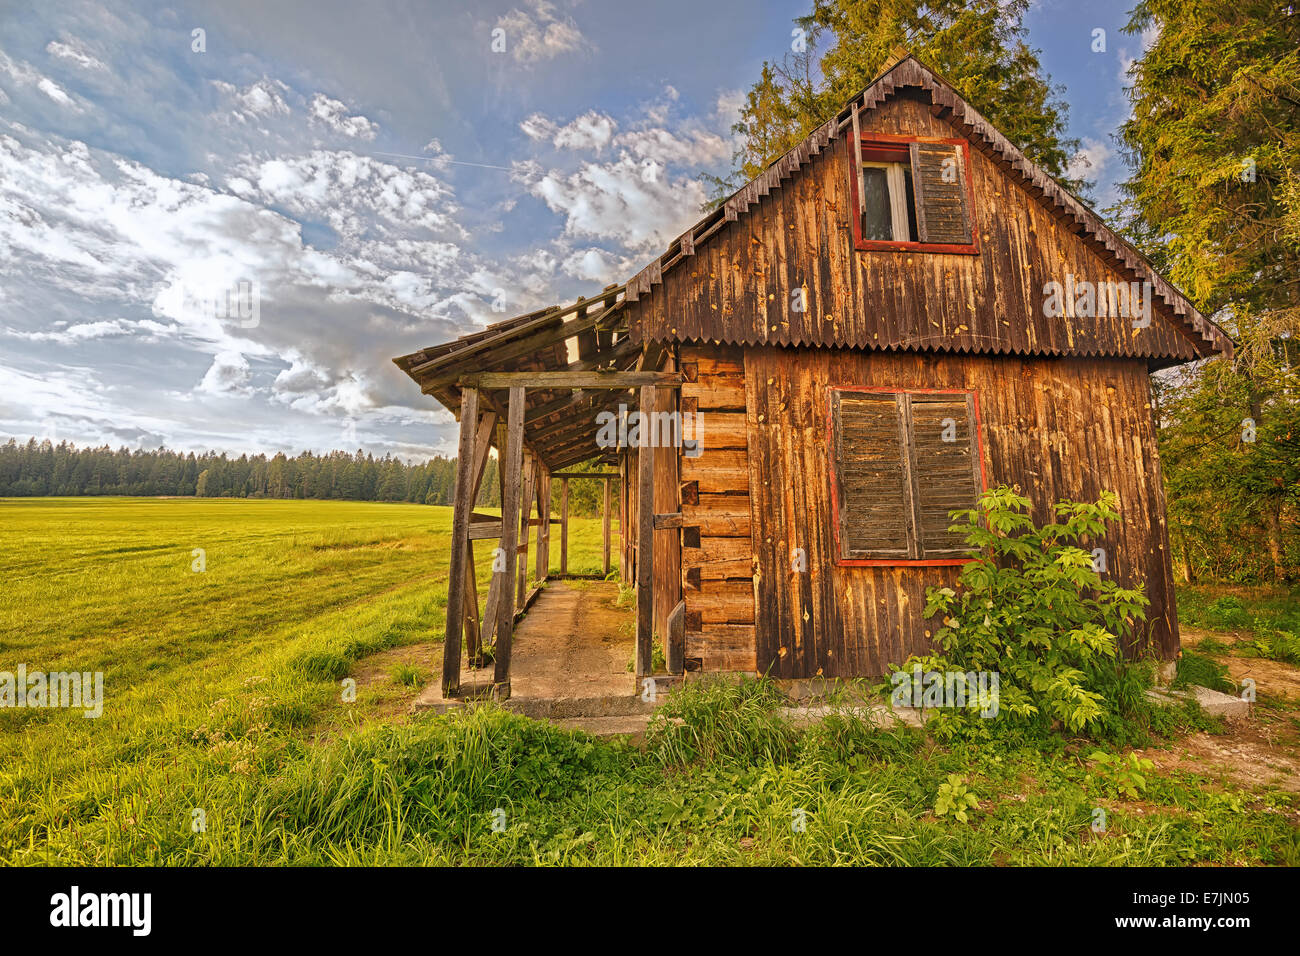 Discarded wooden cabin  in the wilderness. Hdr image. Stock Photo